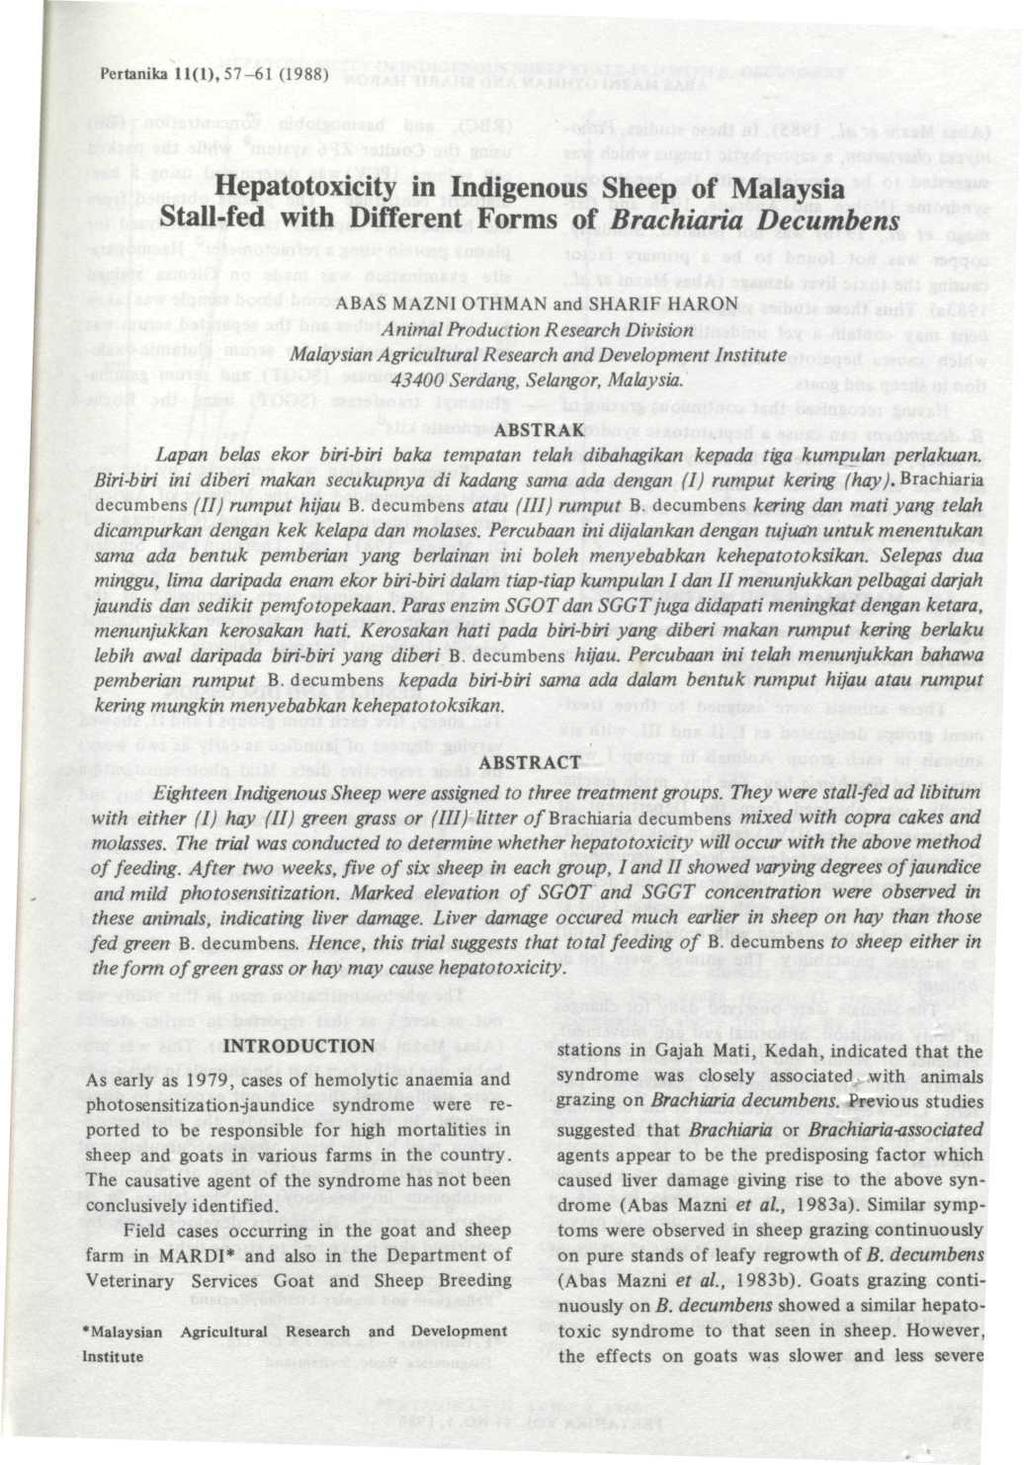 Pertanika 11(1), 57-61 (1988) Hepatotoxicity in Indigenous Sheep of Malaysia Stall-fed with Different Forms of Brachiaria Decumbens ABAS MAZNI OTHMAN and SHARIF HARON Animal Production Research